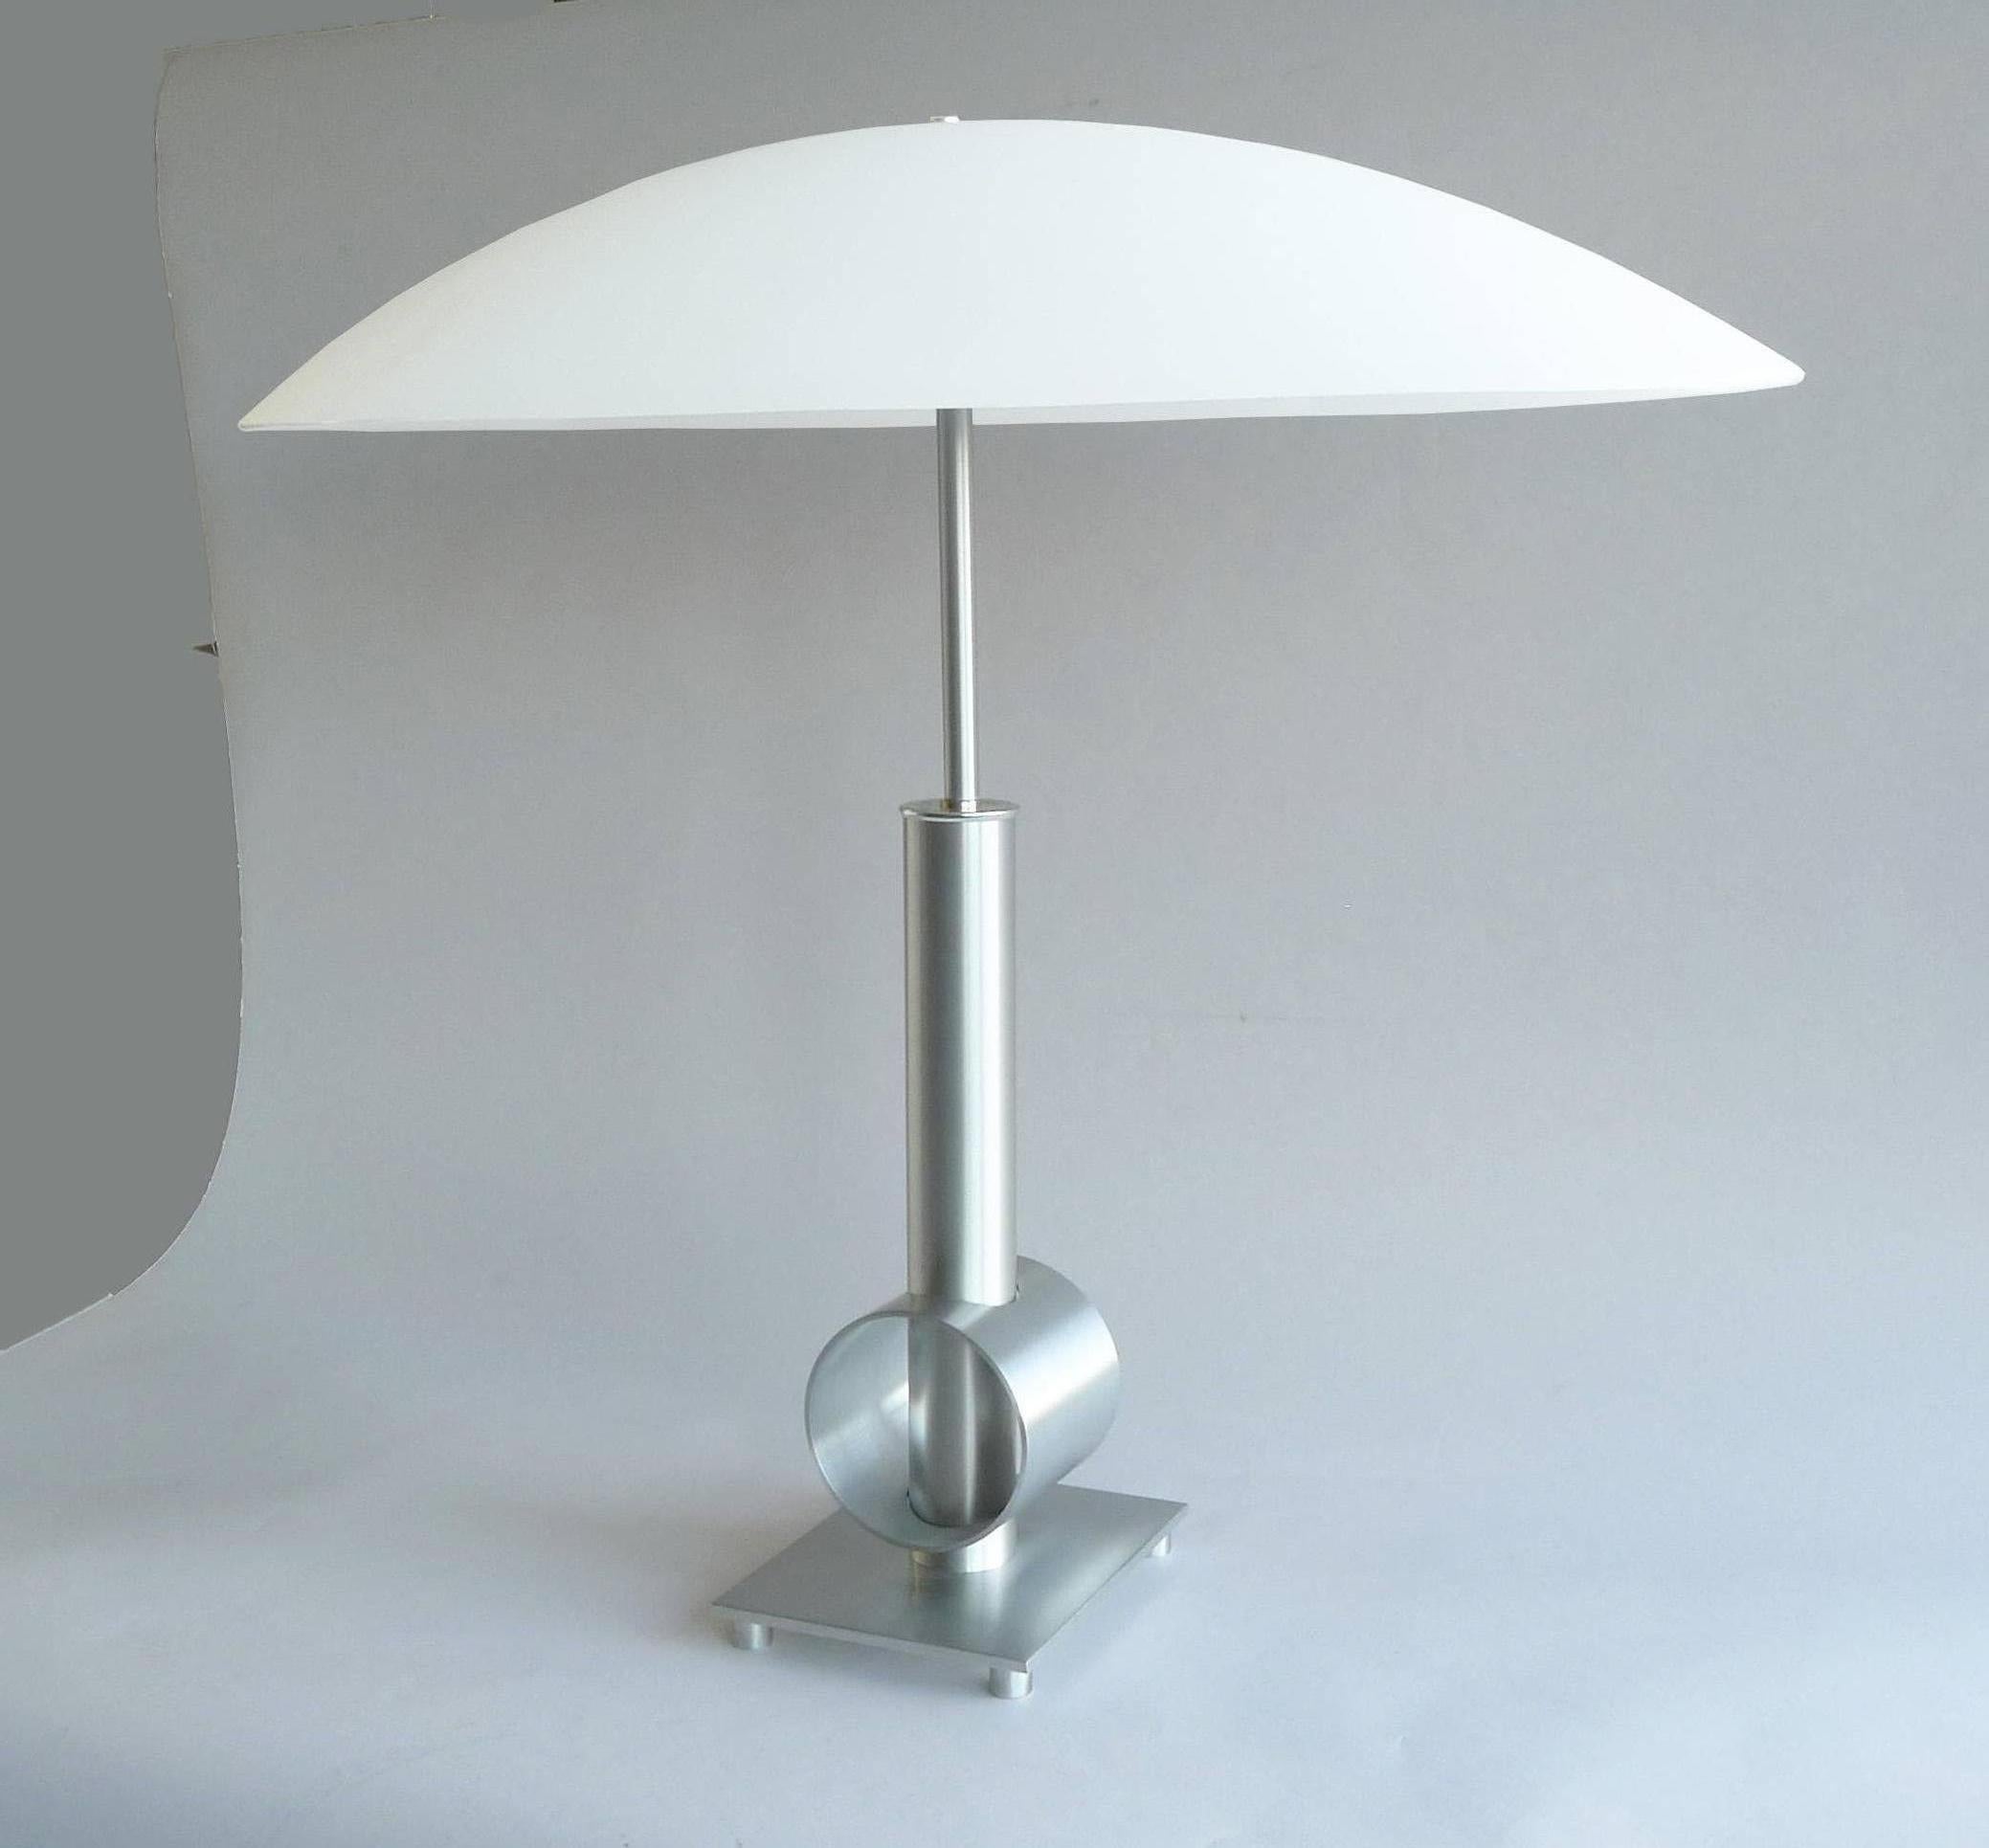 American Mid-Century Modern Style Table Lamp with Large Oval Glass Shade For Sale